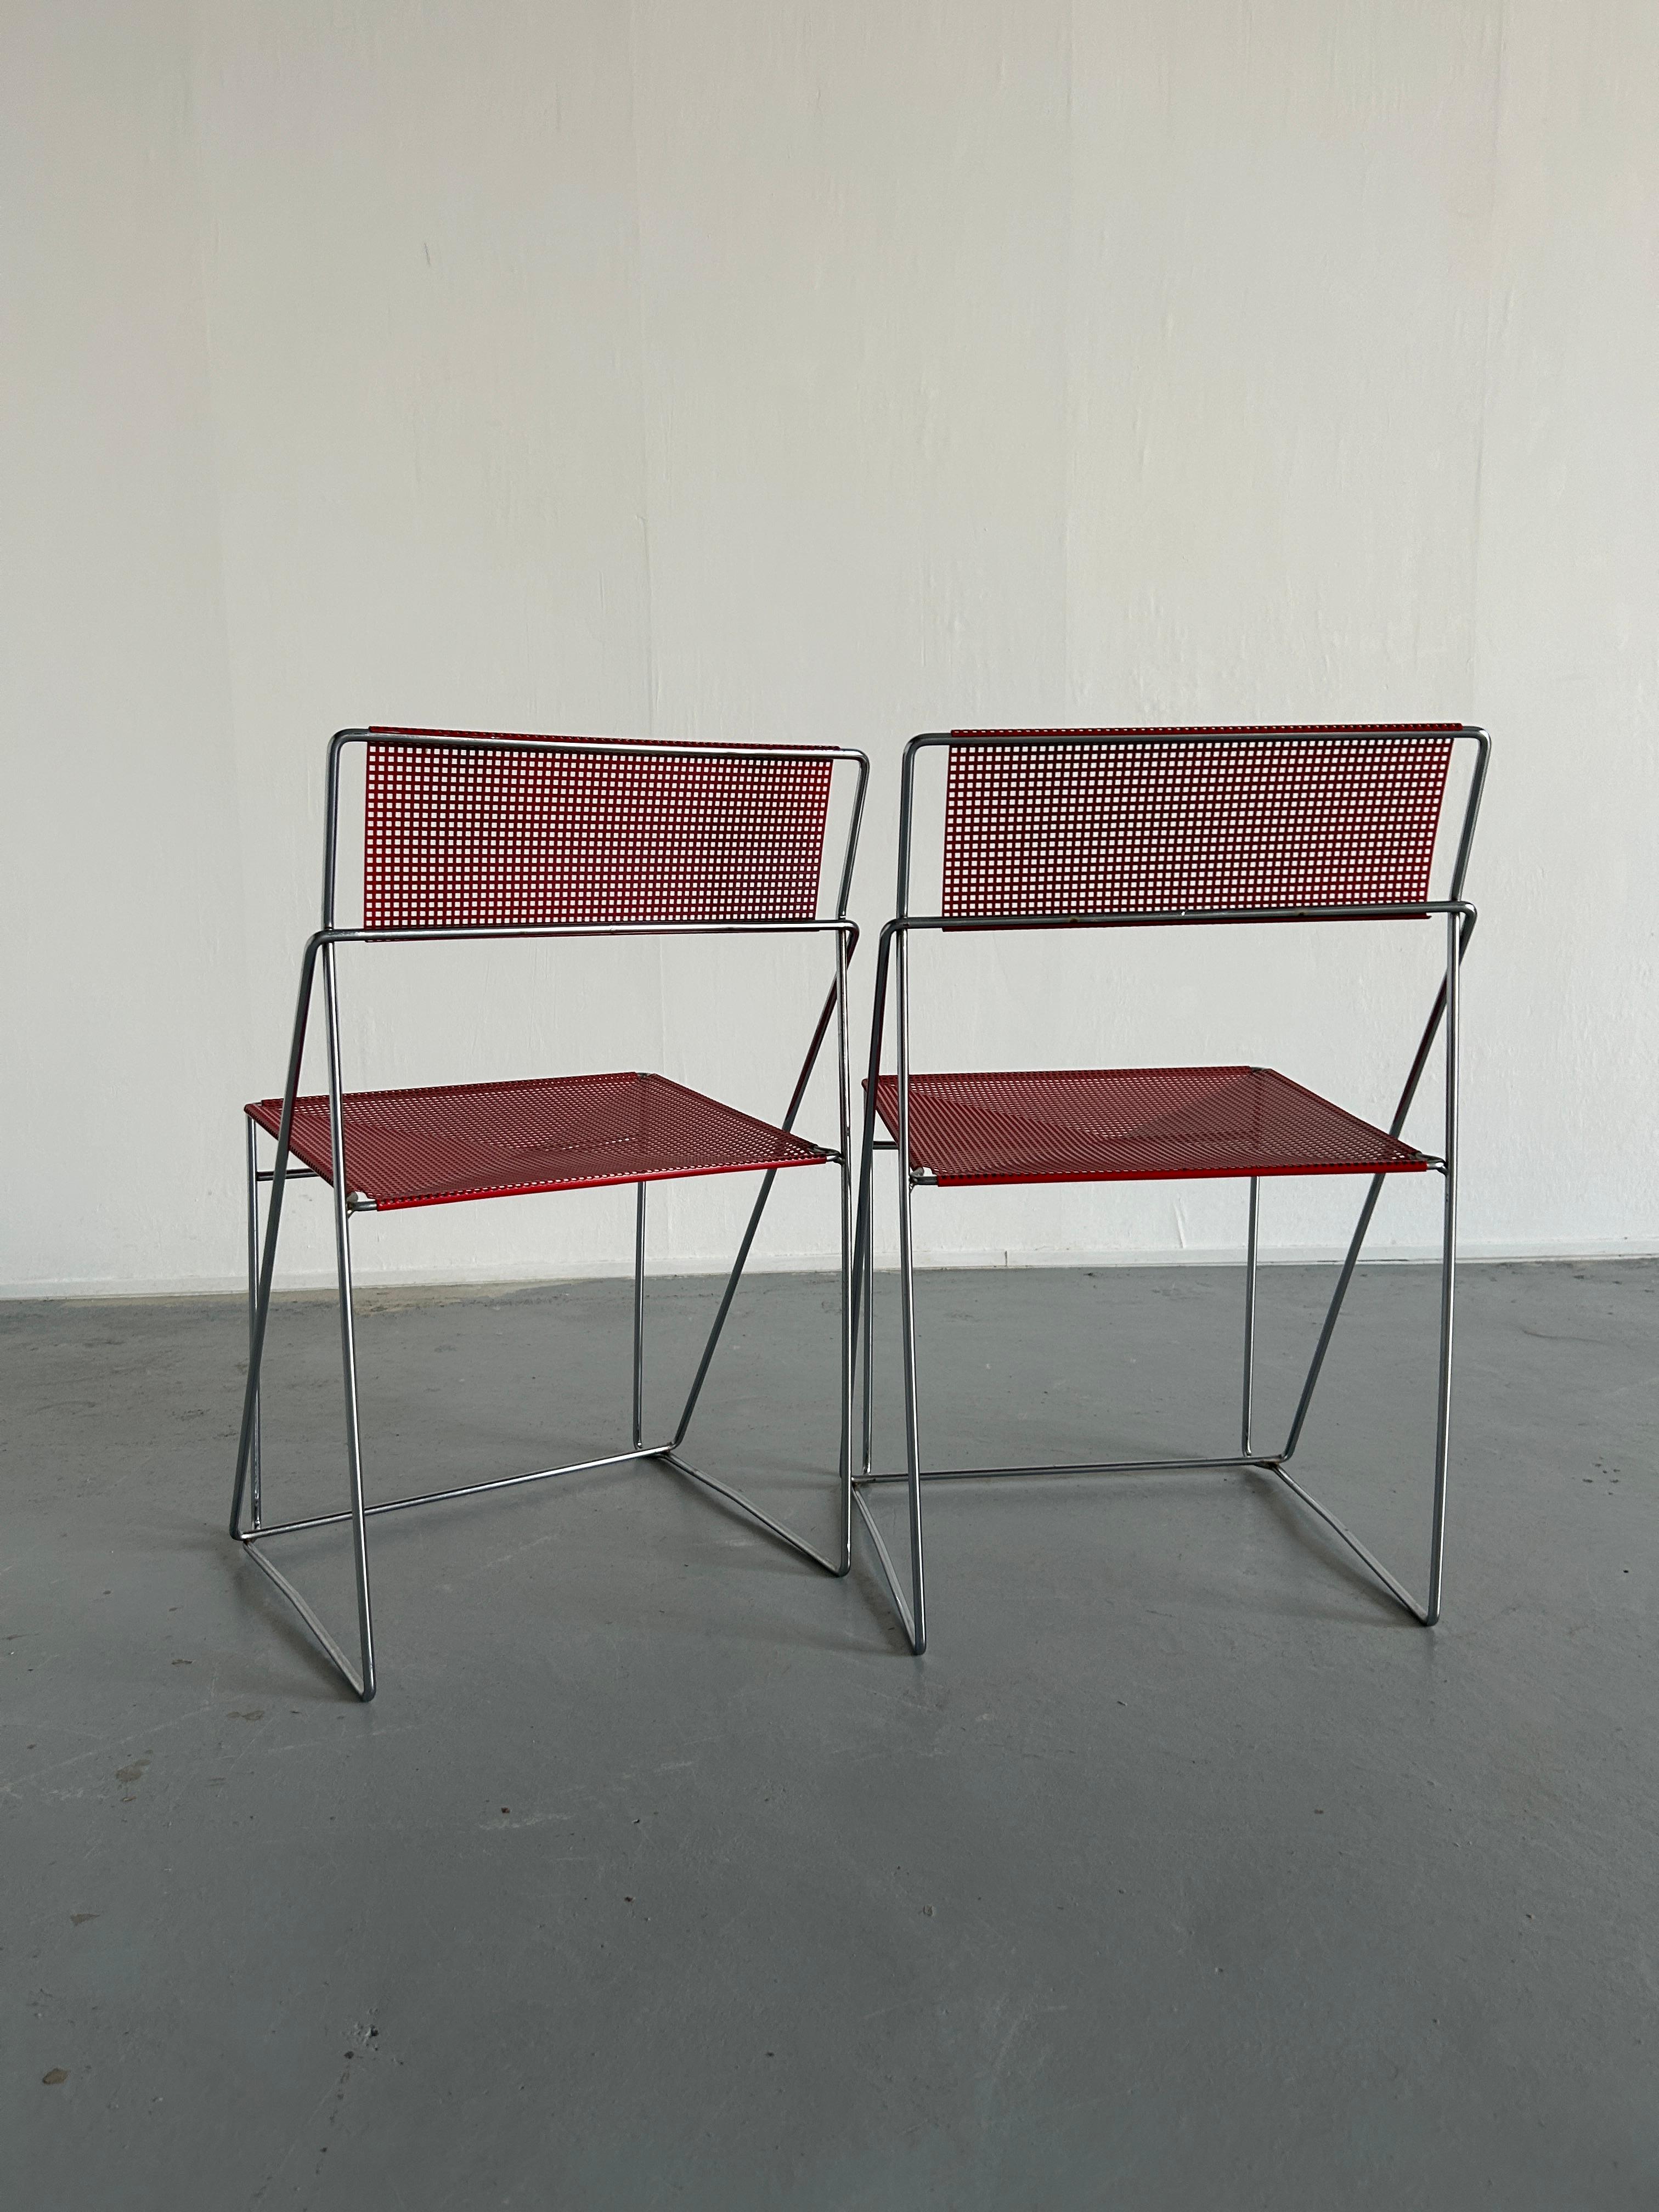 Late 20th Century Pair of Vintage Red 'X-Line' Chromed and Lacquered Chairs, Niels Jørgen Haugesen